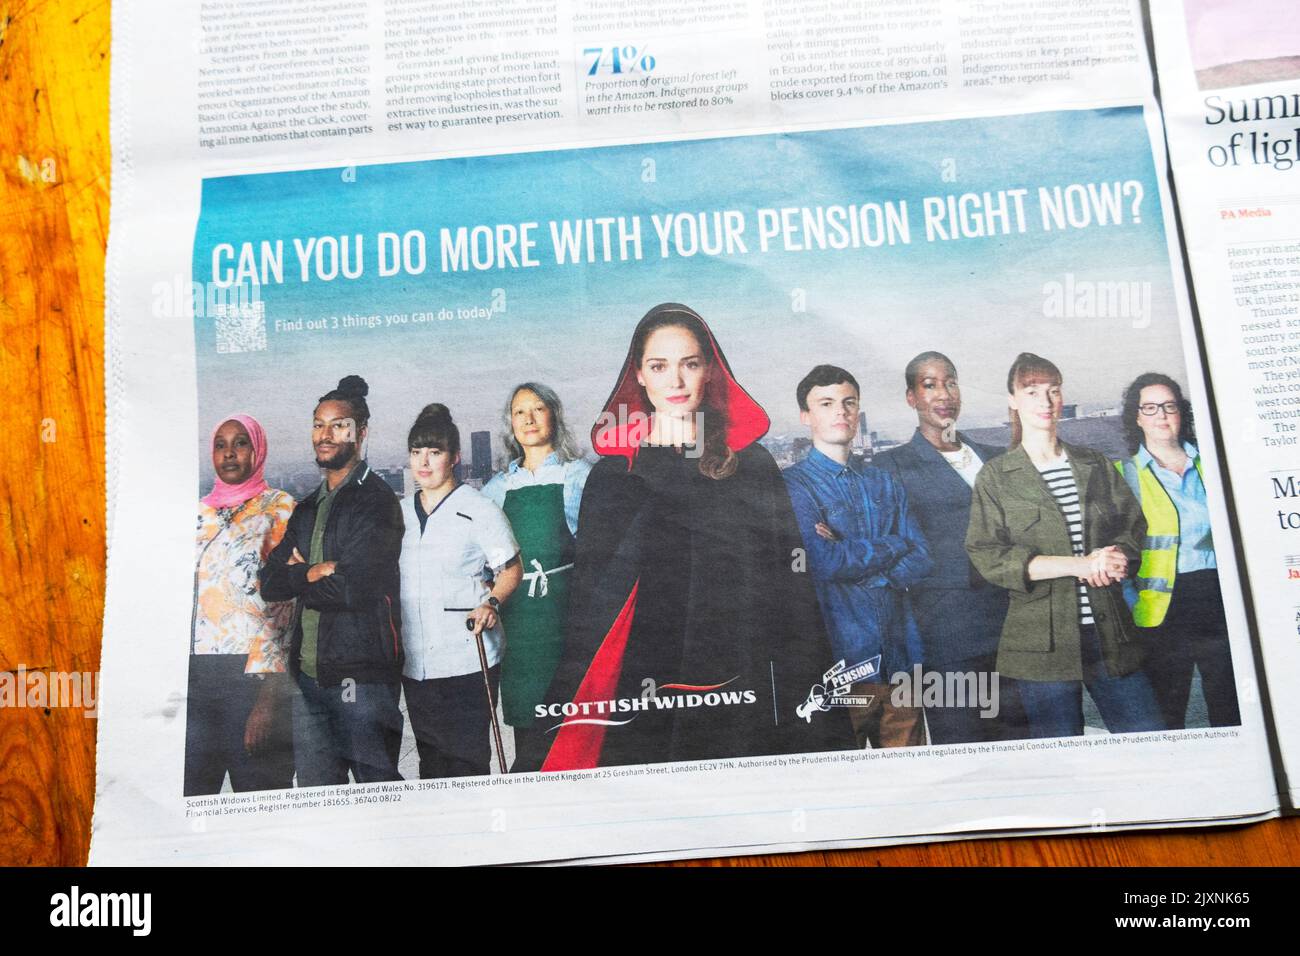 Scottish Widows newspaper advert 'Can You Do More With Your Pension Right Now? in Guardian newspaper pensions September 2022 London England Britain UK Stock Photo